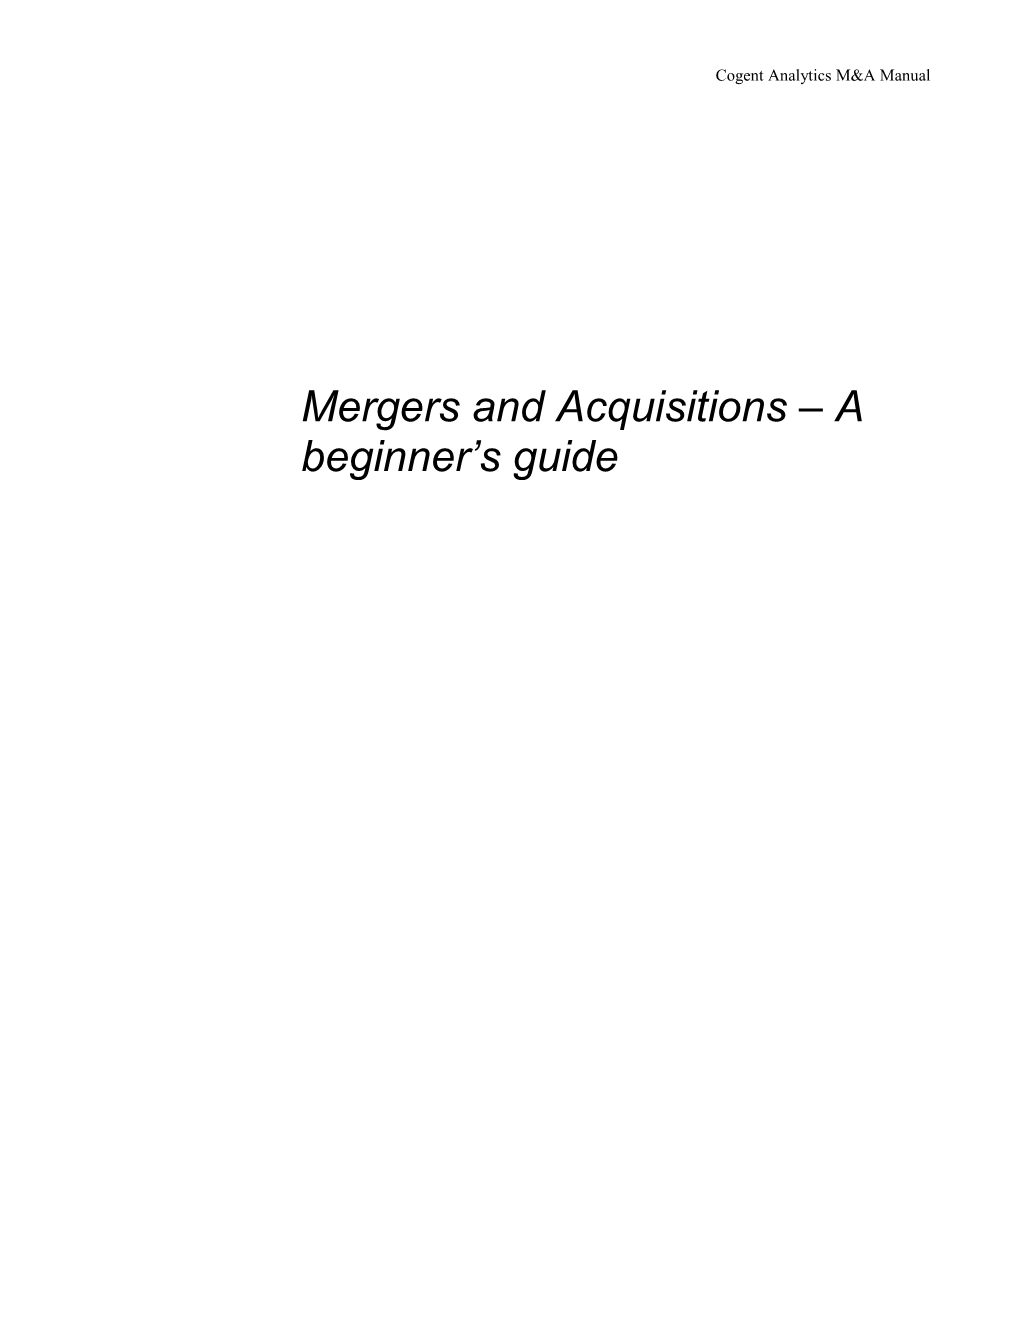 Mergers and Acquisitions a Beginners Guide